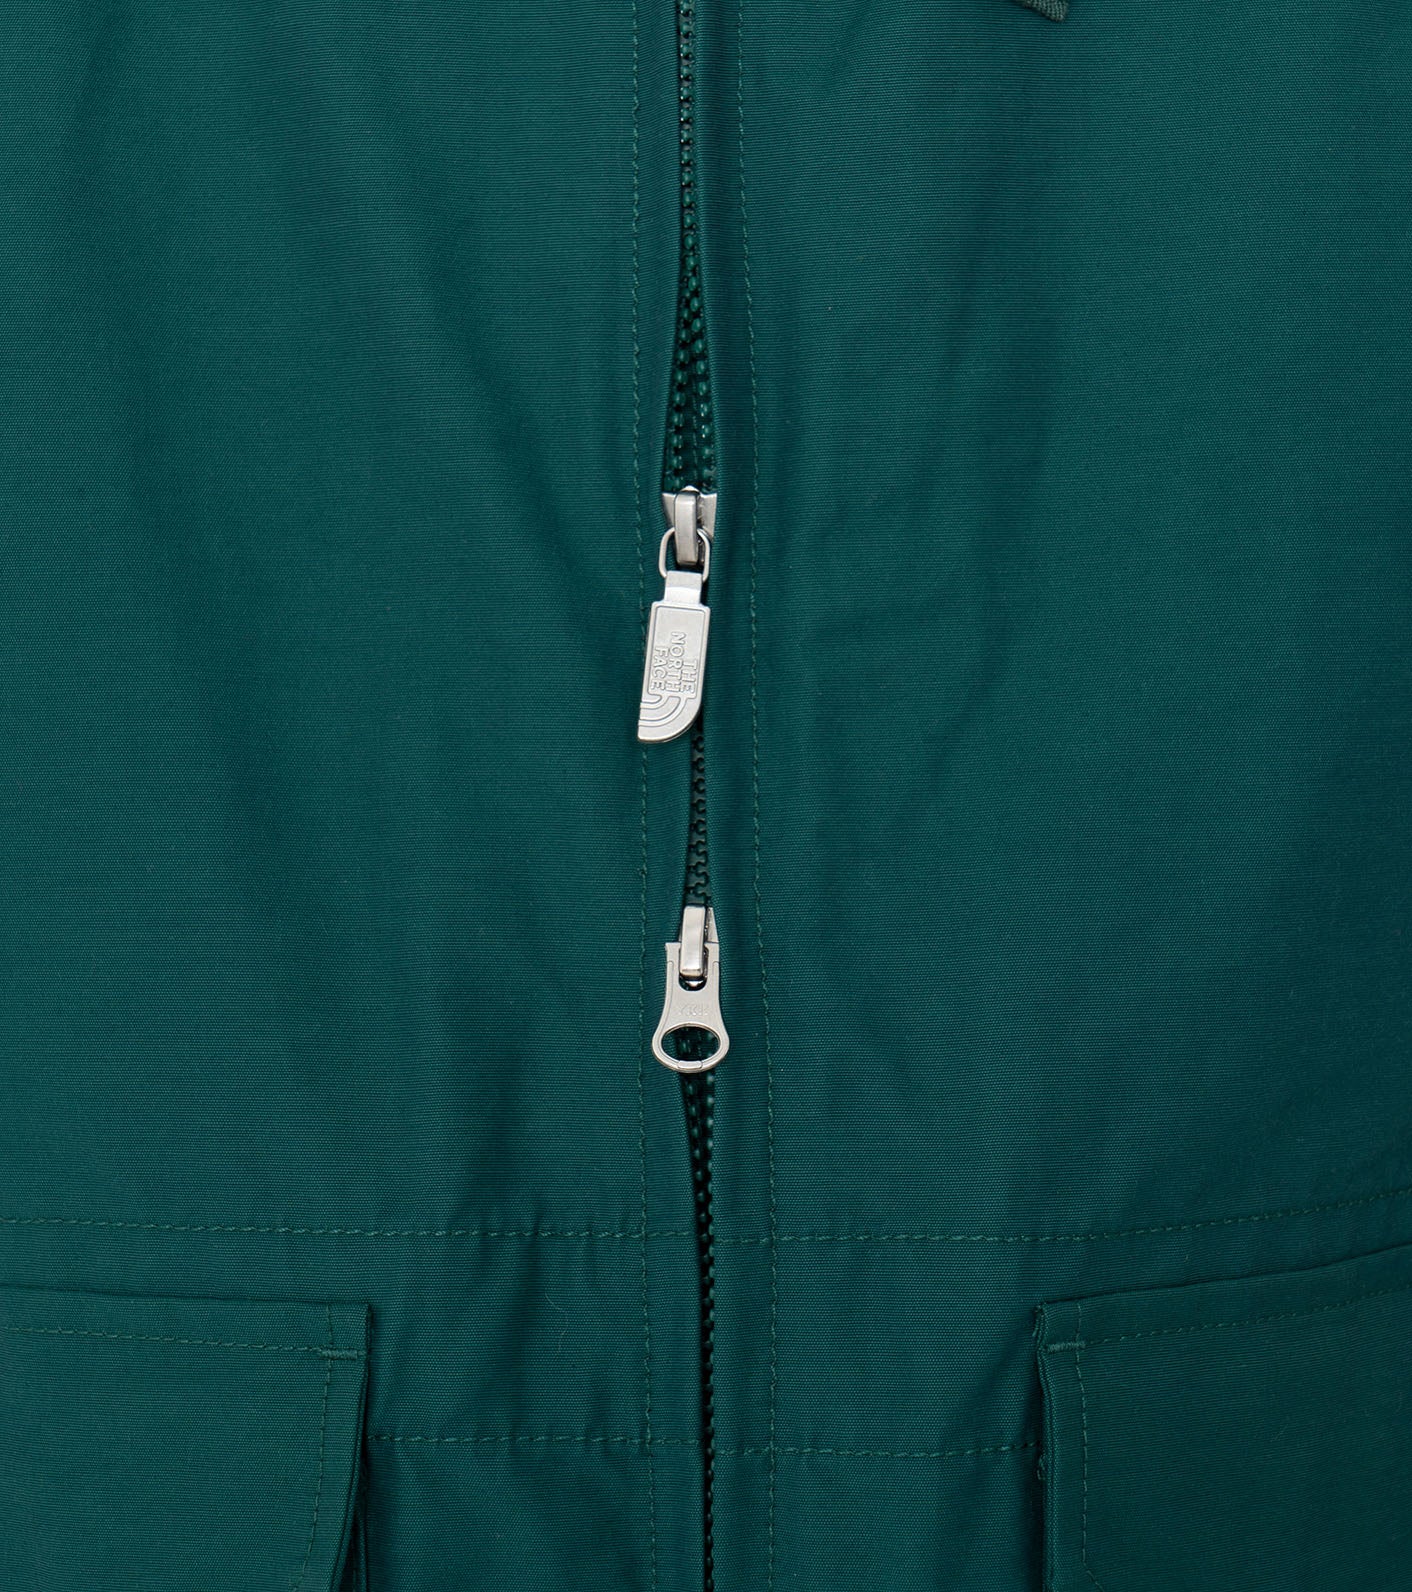 Mountain Wind Parka - EVER GREEN